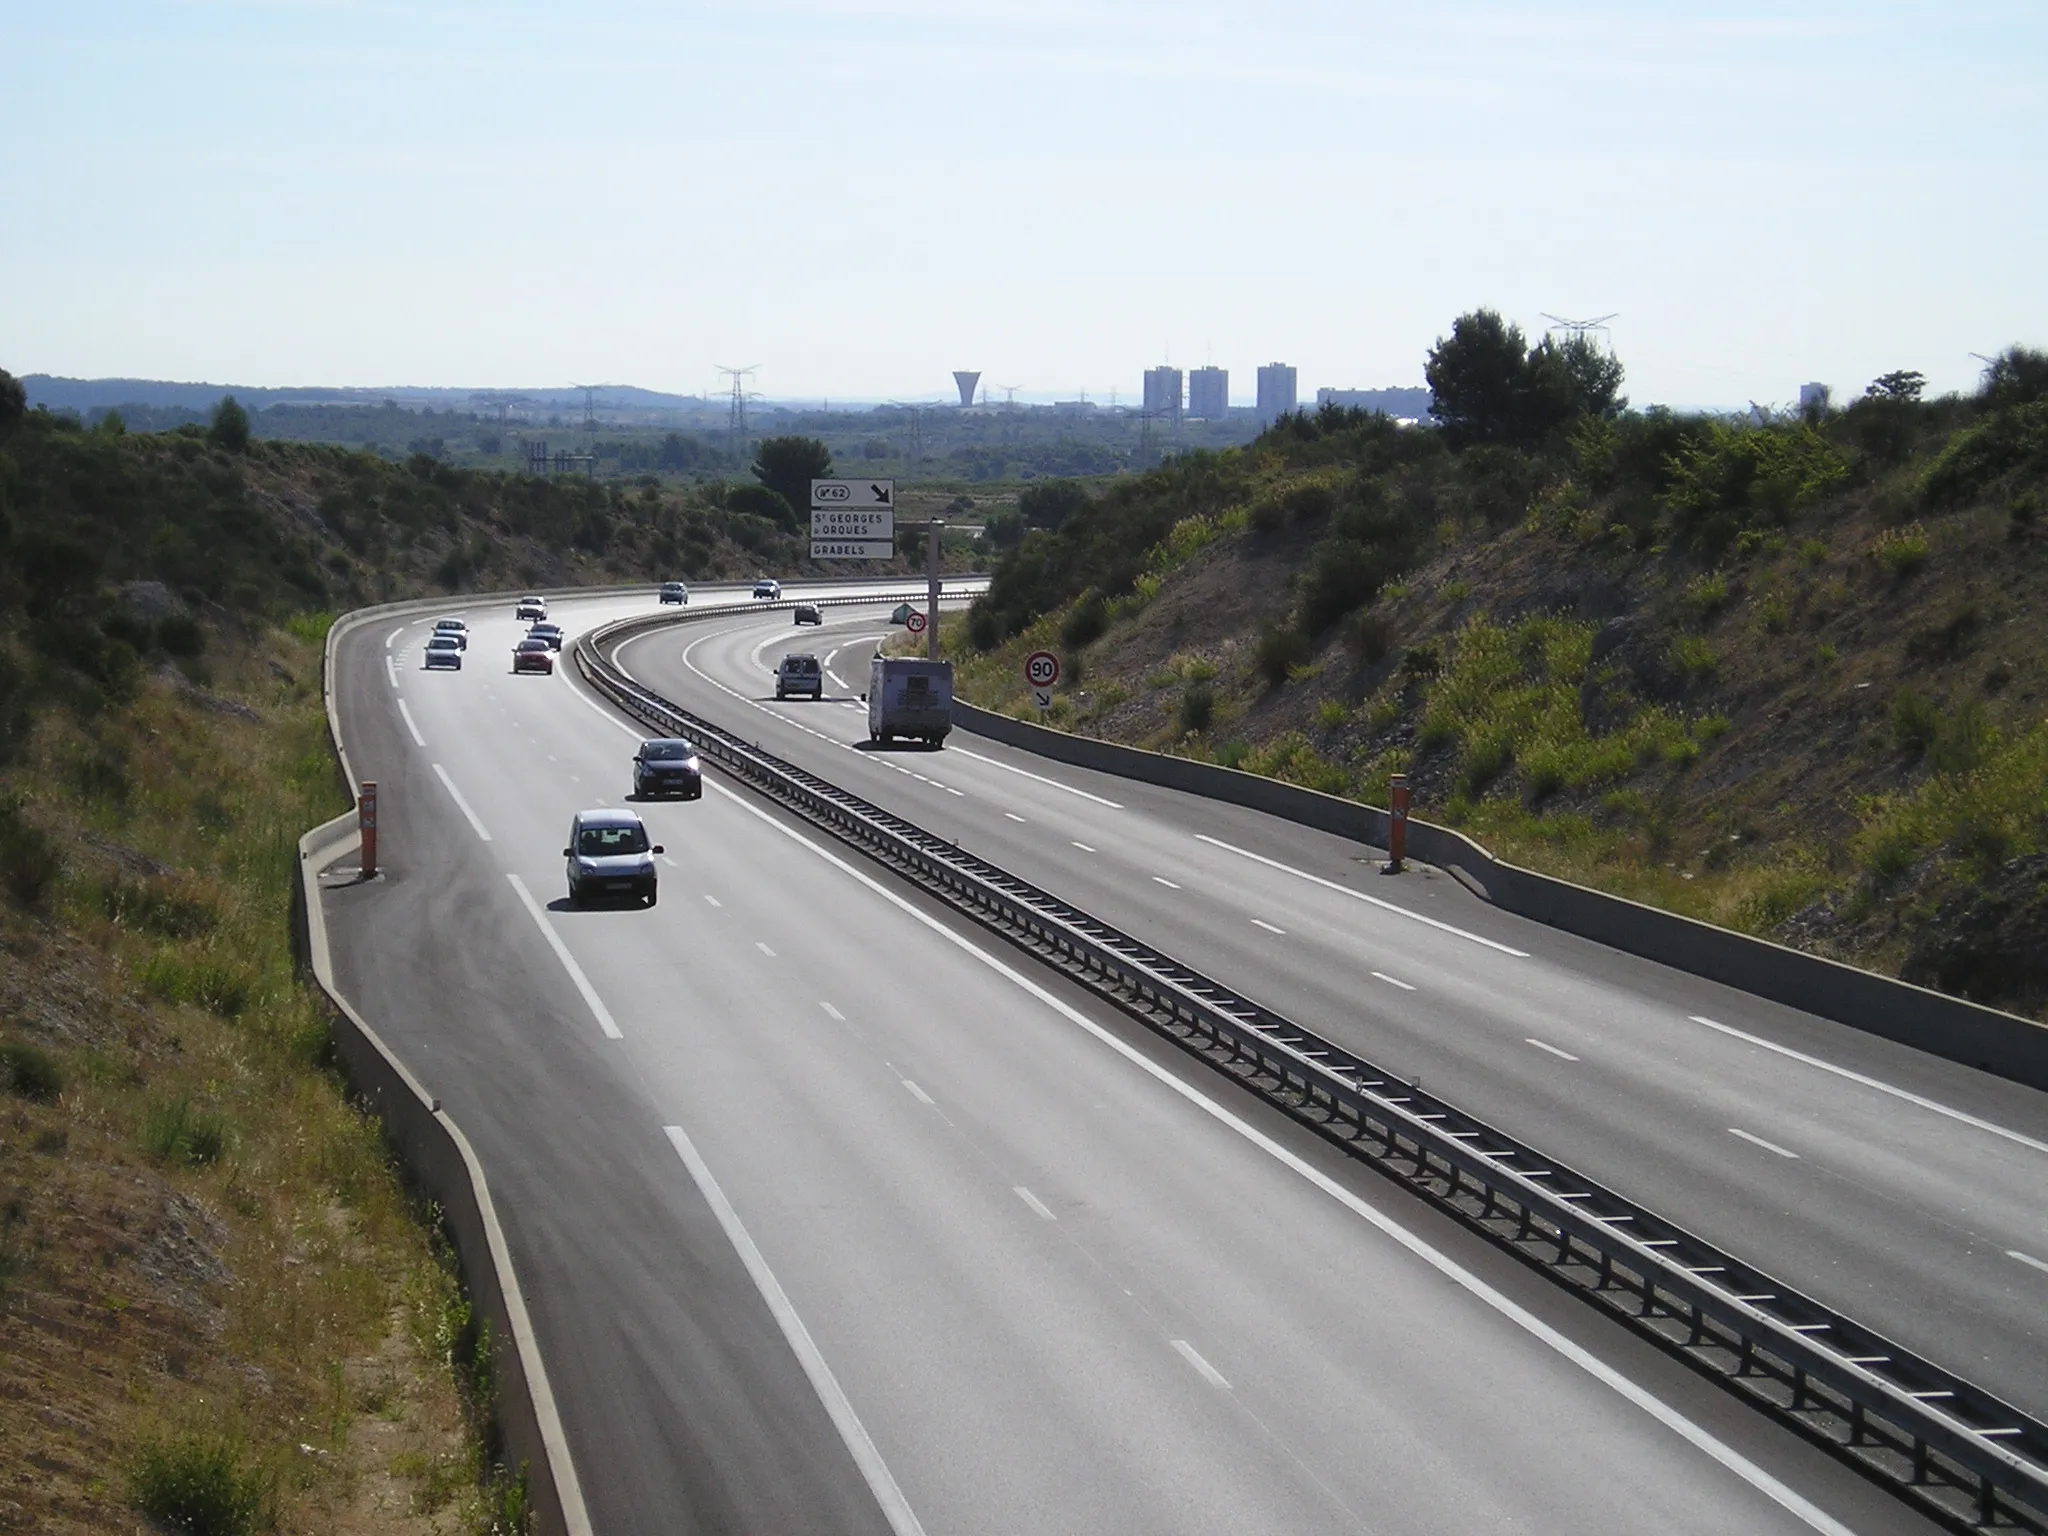 Photo showing: In Hérault, west of Montpellier, highway A750 viewed from the bridge on the D102 road next to Bel-Air and exit #62 (on Saint-Georges-d'Orques territory). In the background, the northern part of Montpellier area of La Paillade (water reservoir and the three towers of residential "Tritons" estate).